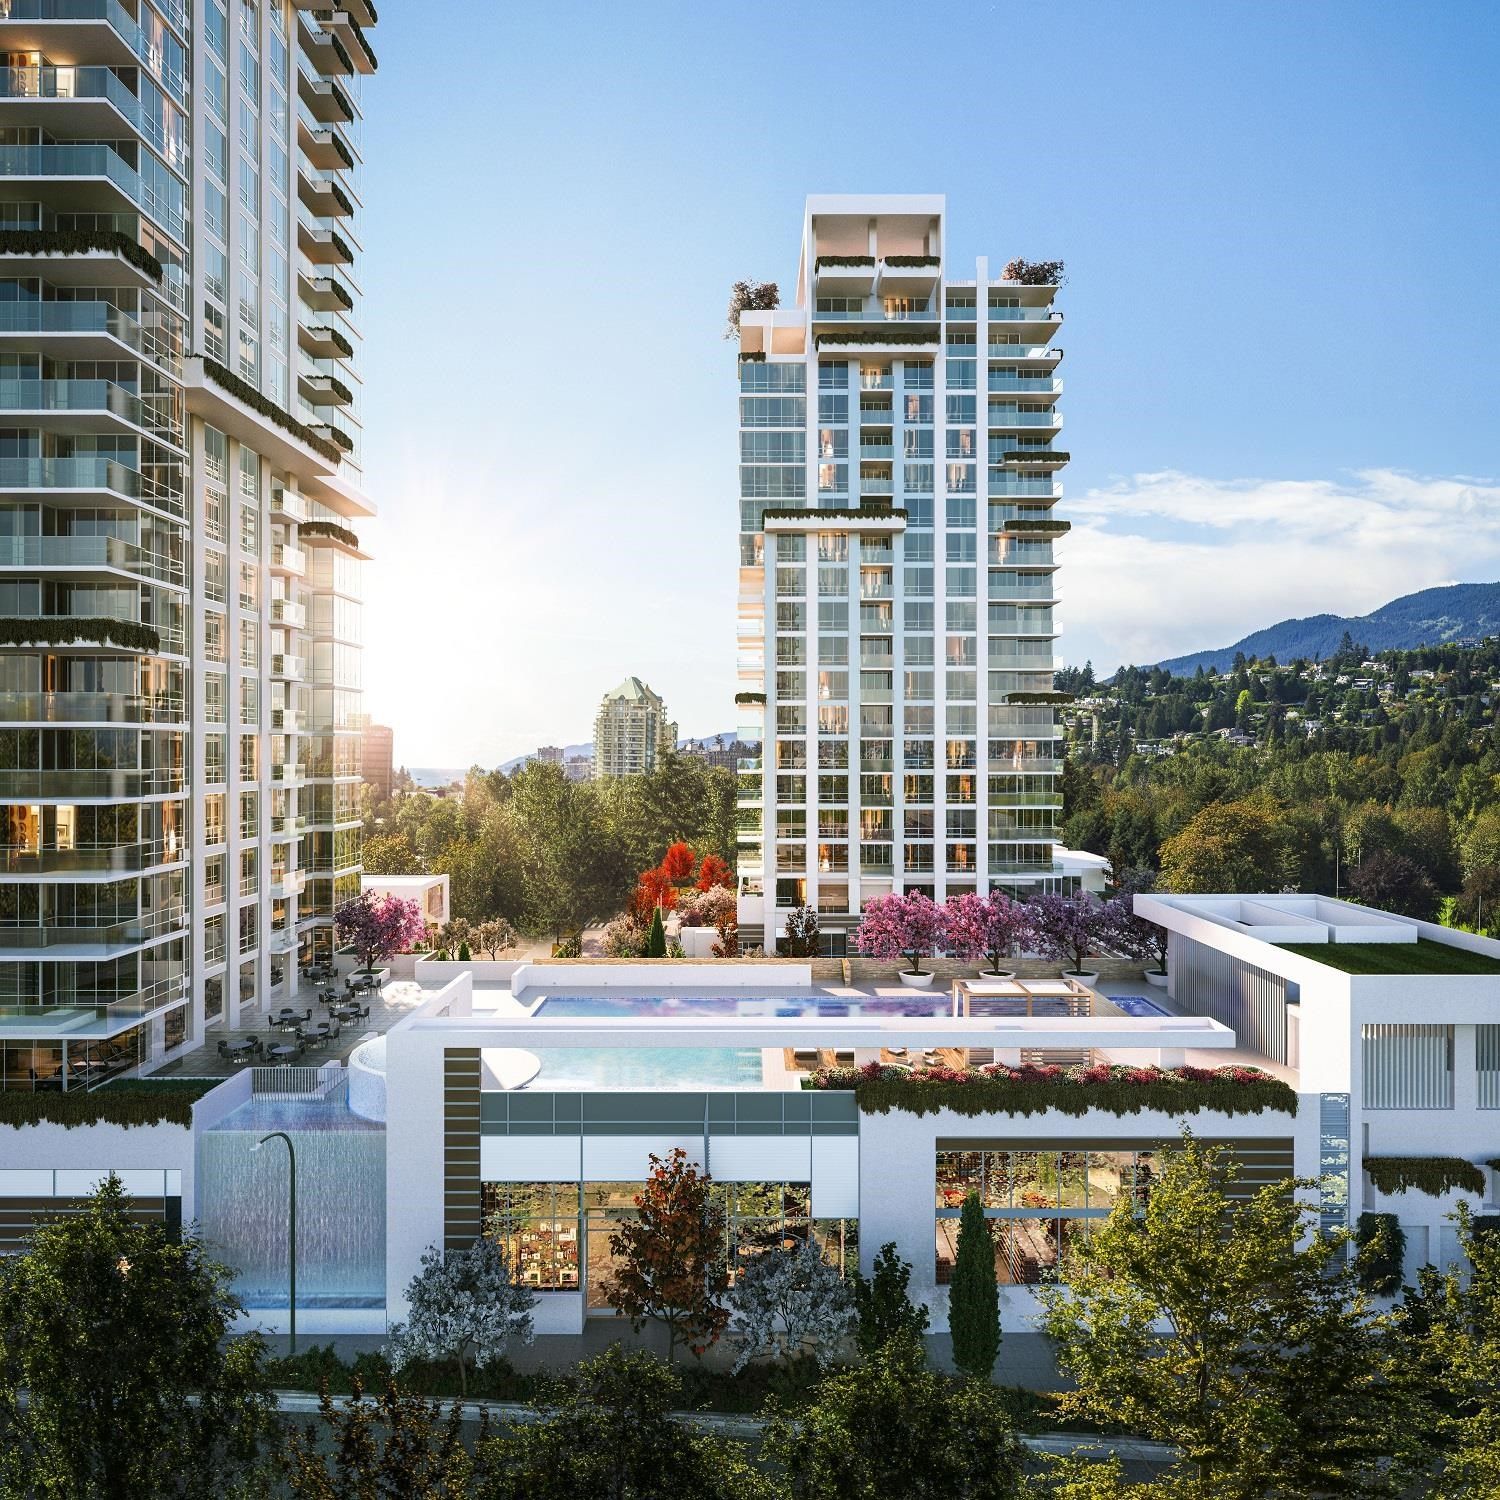 Unit 1201 is one of rare corner suites located at tower 1 (left) with large balcony and planter facing north. So you can see the beautiful amenities including resort type large swimming pool and beautiful mountains of north shore from your north balcony.